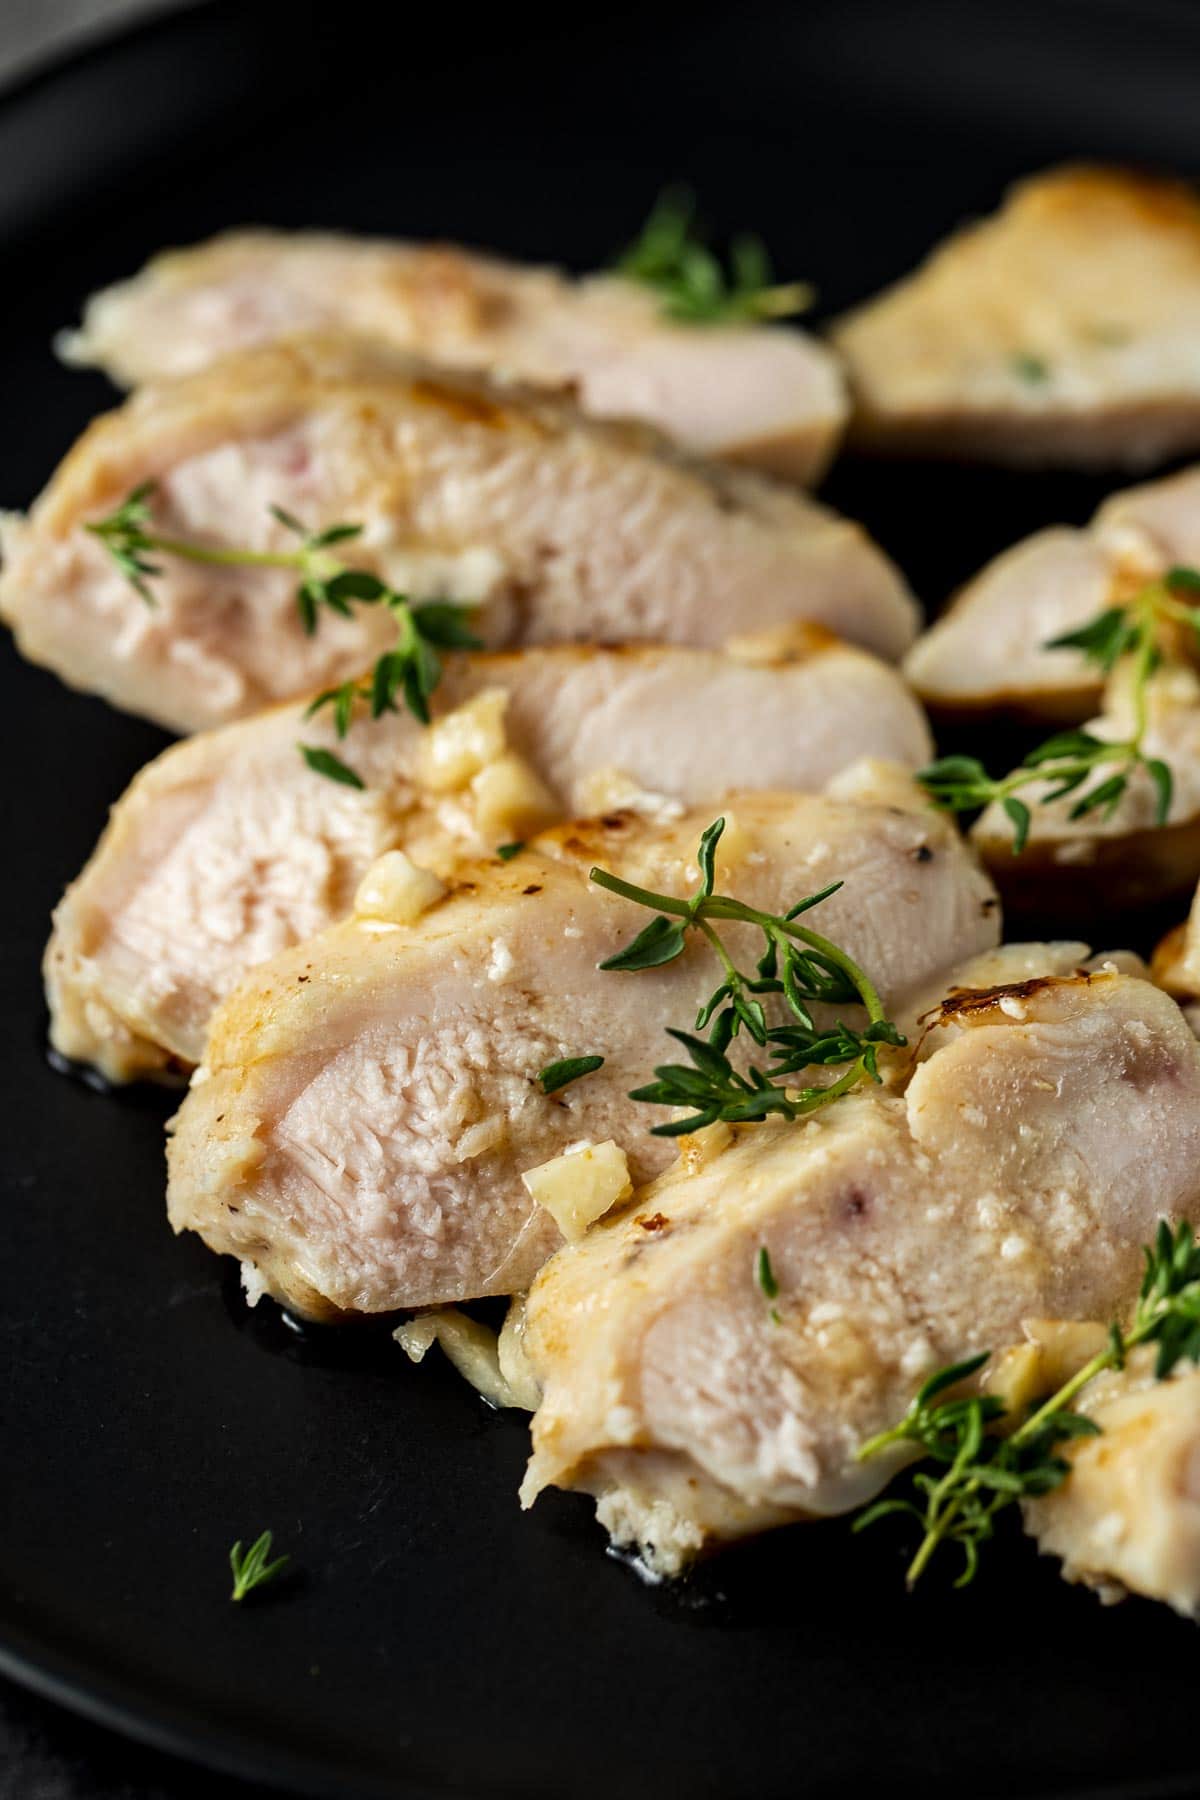 https://www.wenthere8this.com/wp-content/uploads/2021/01/sous-vide-chicken-breast-3.jpg